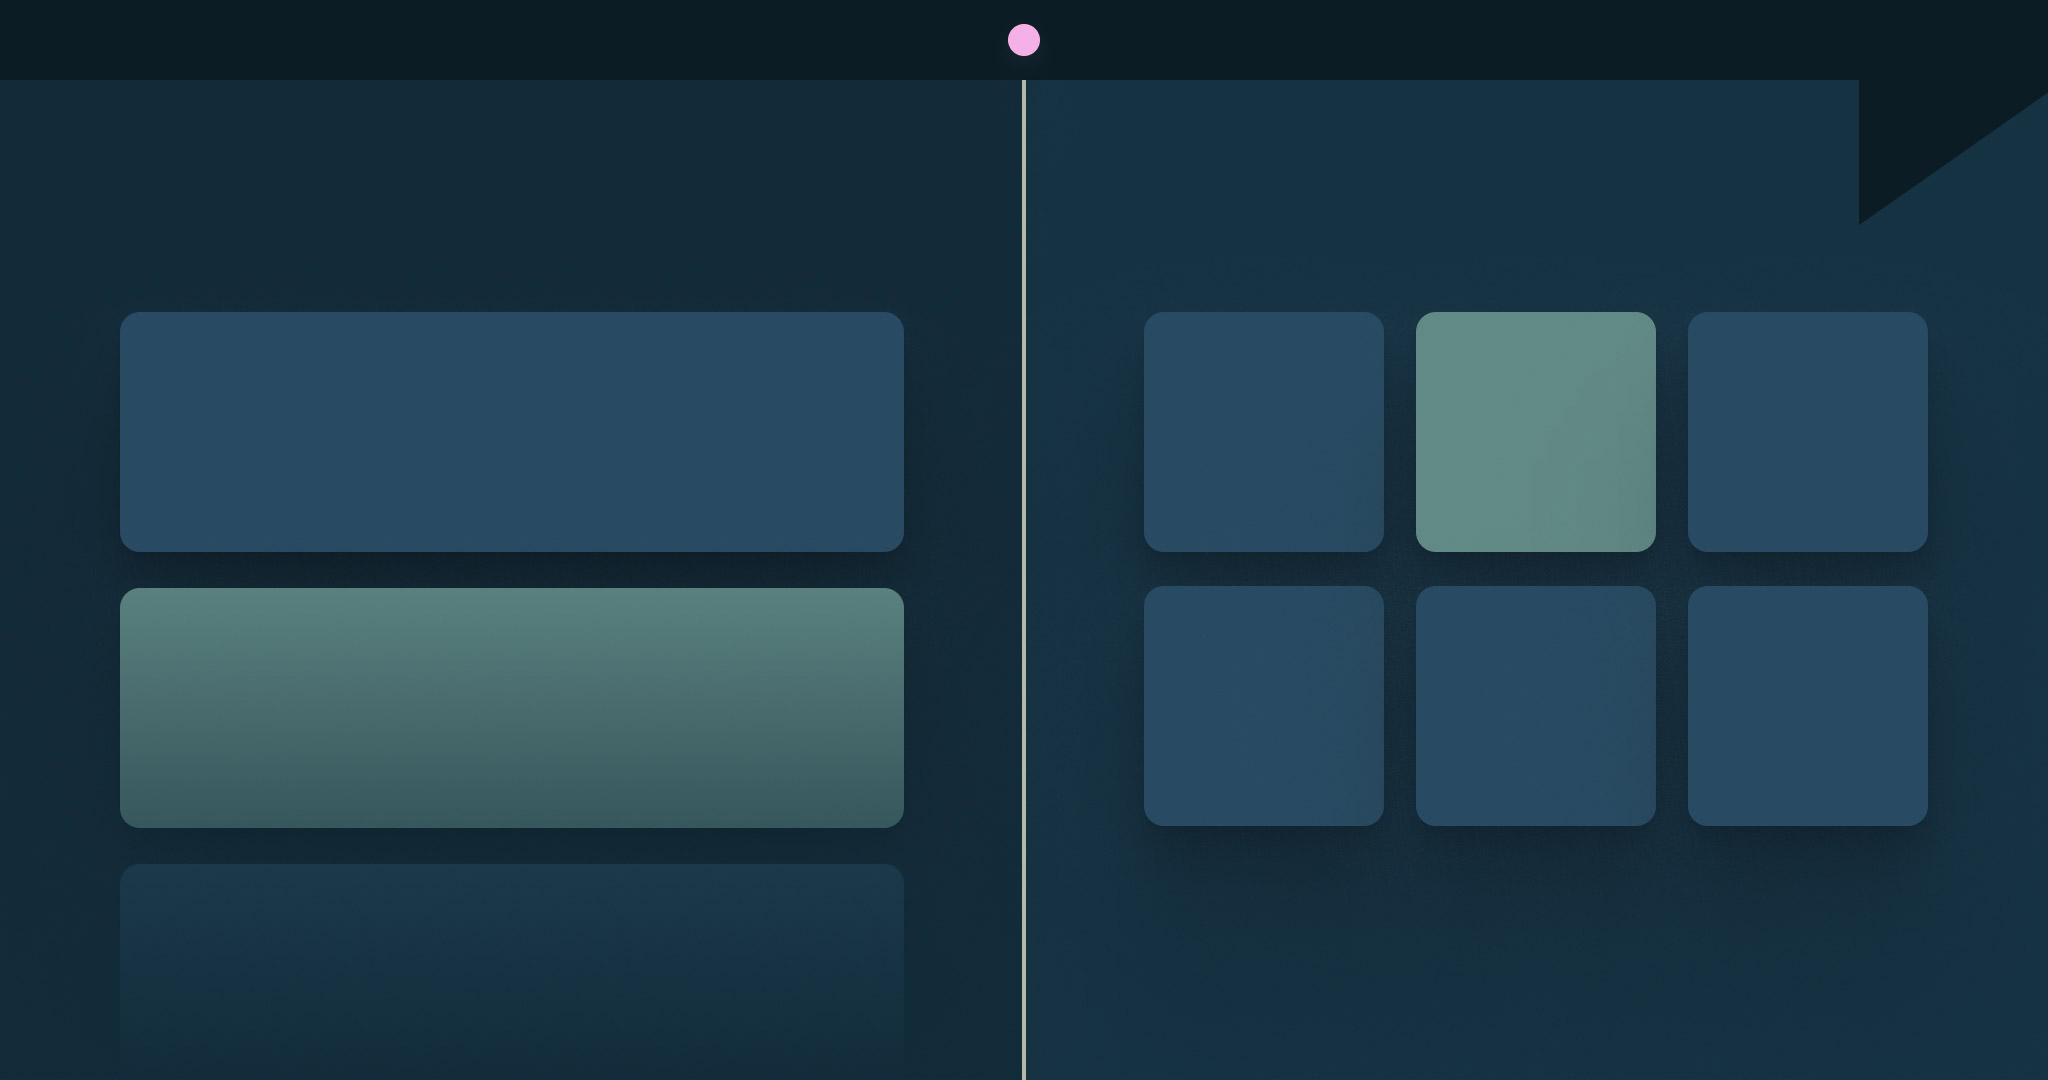 Using responsive modifiers to control layout changes in your components